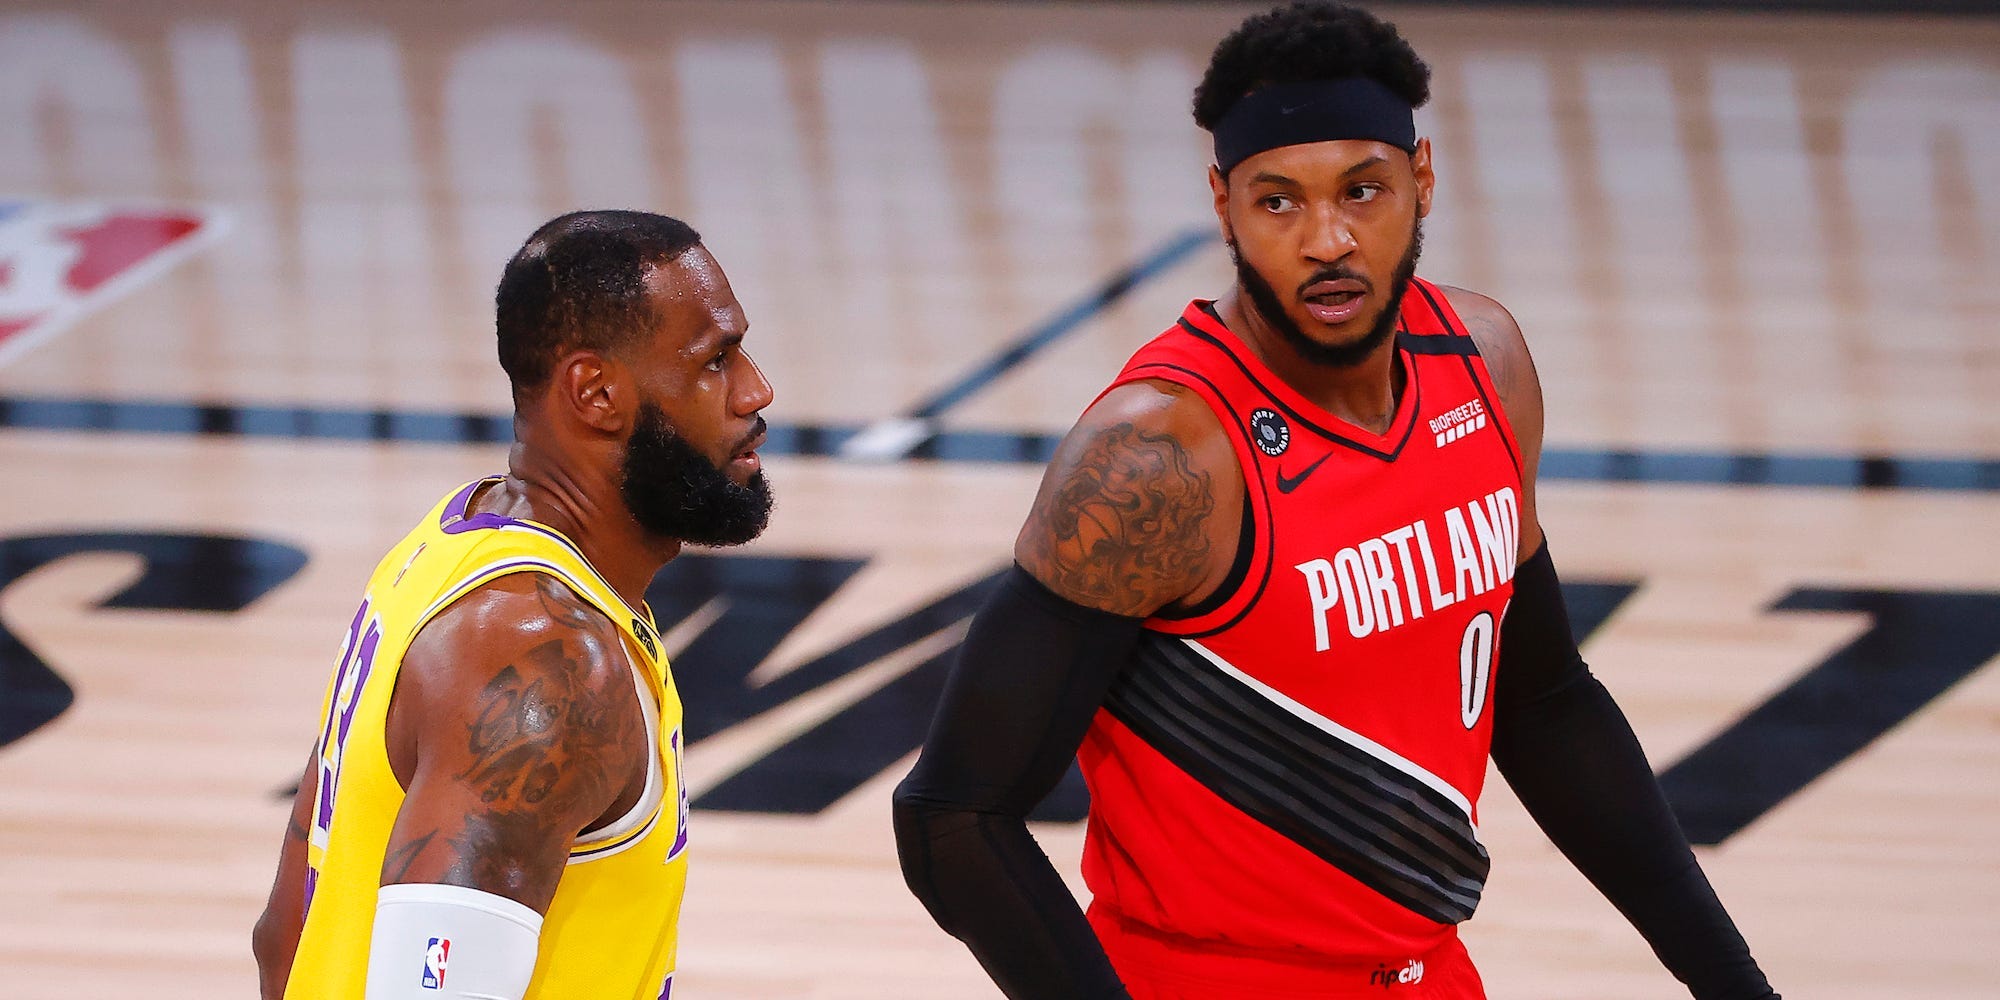 Carmelo Anthony looks at LeBron James during a game in 2020.